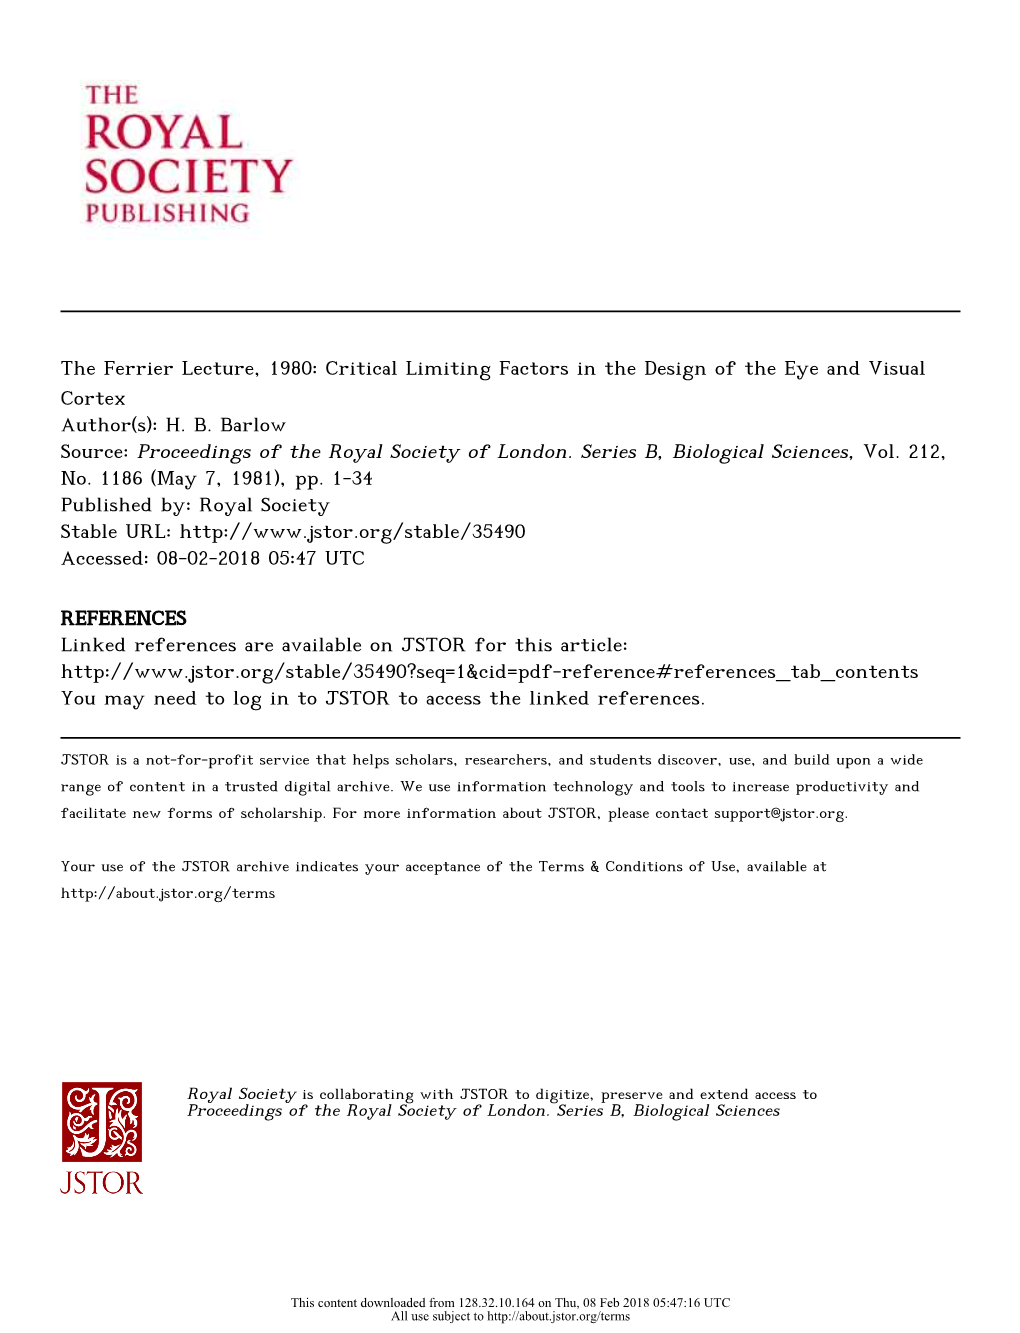 Critical Limiting Factors in the Design of the Eye and Visual Cortex Author(S): H